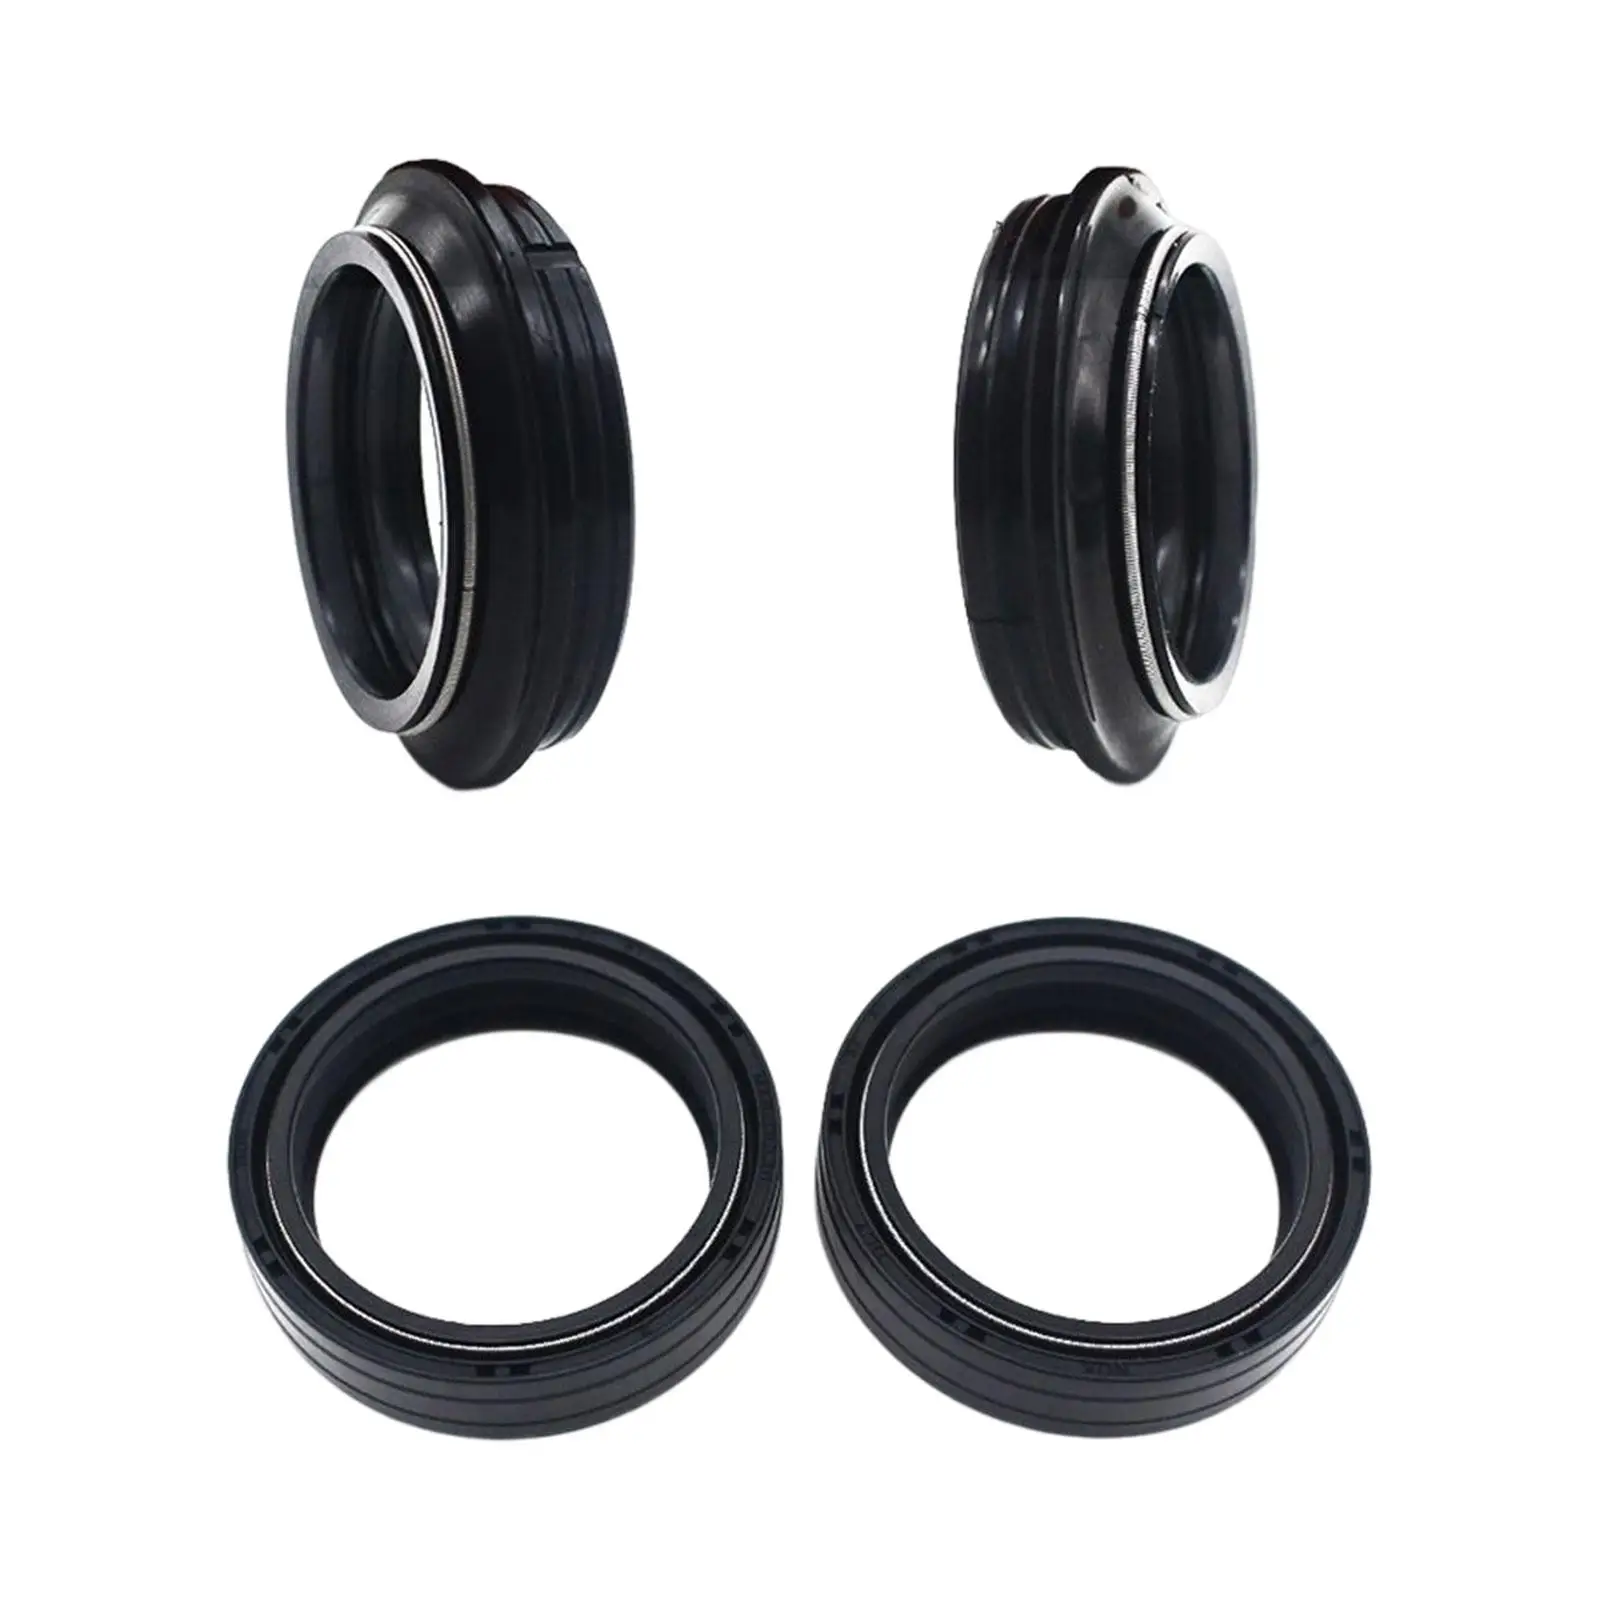 Fork and Dust Seal Kit Motorcycle Accessories for BMW R1200GS Adventure